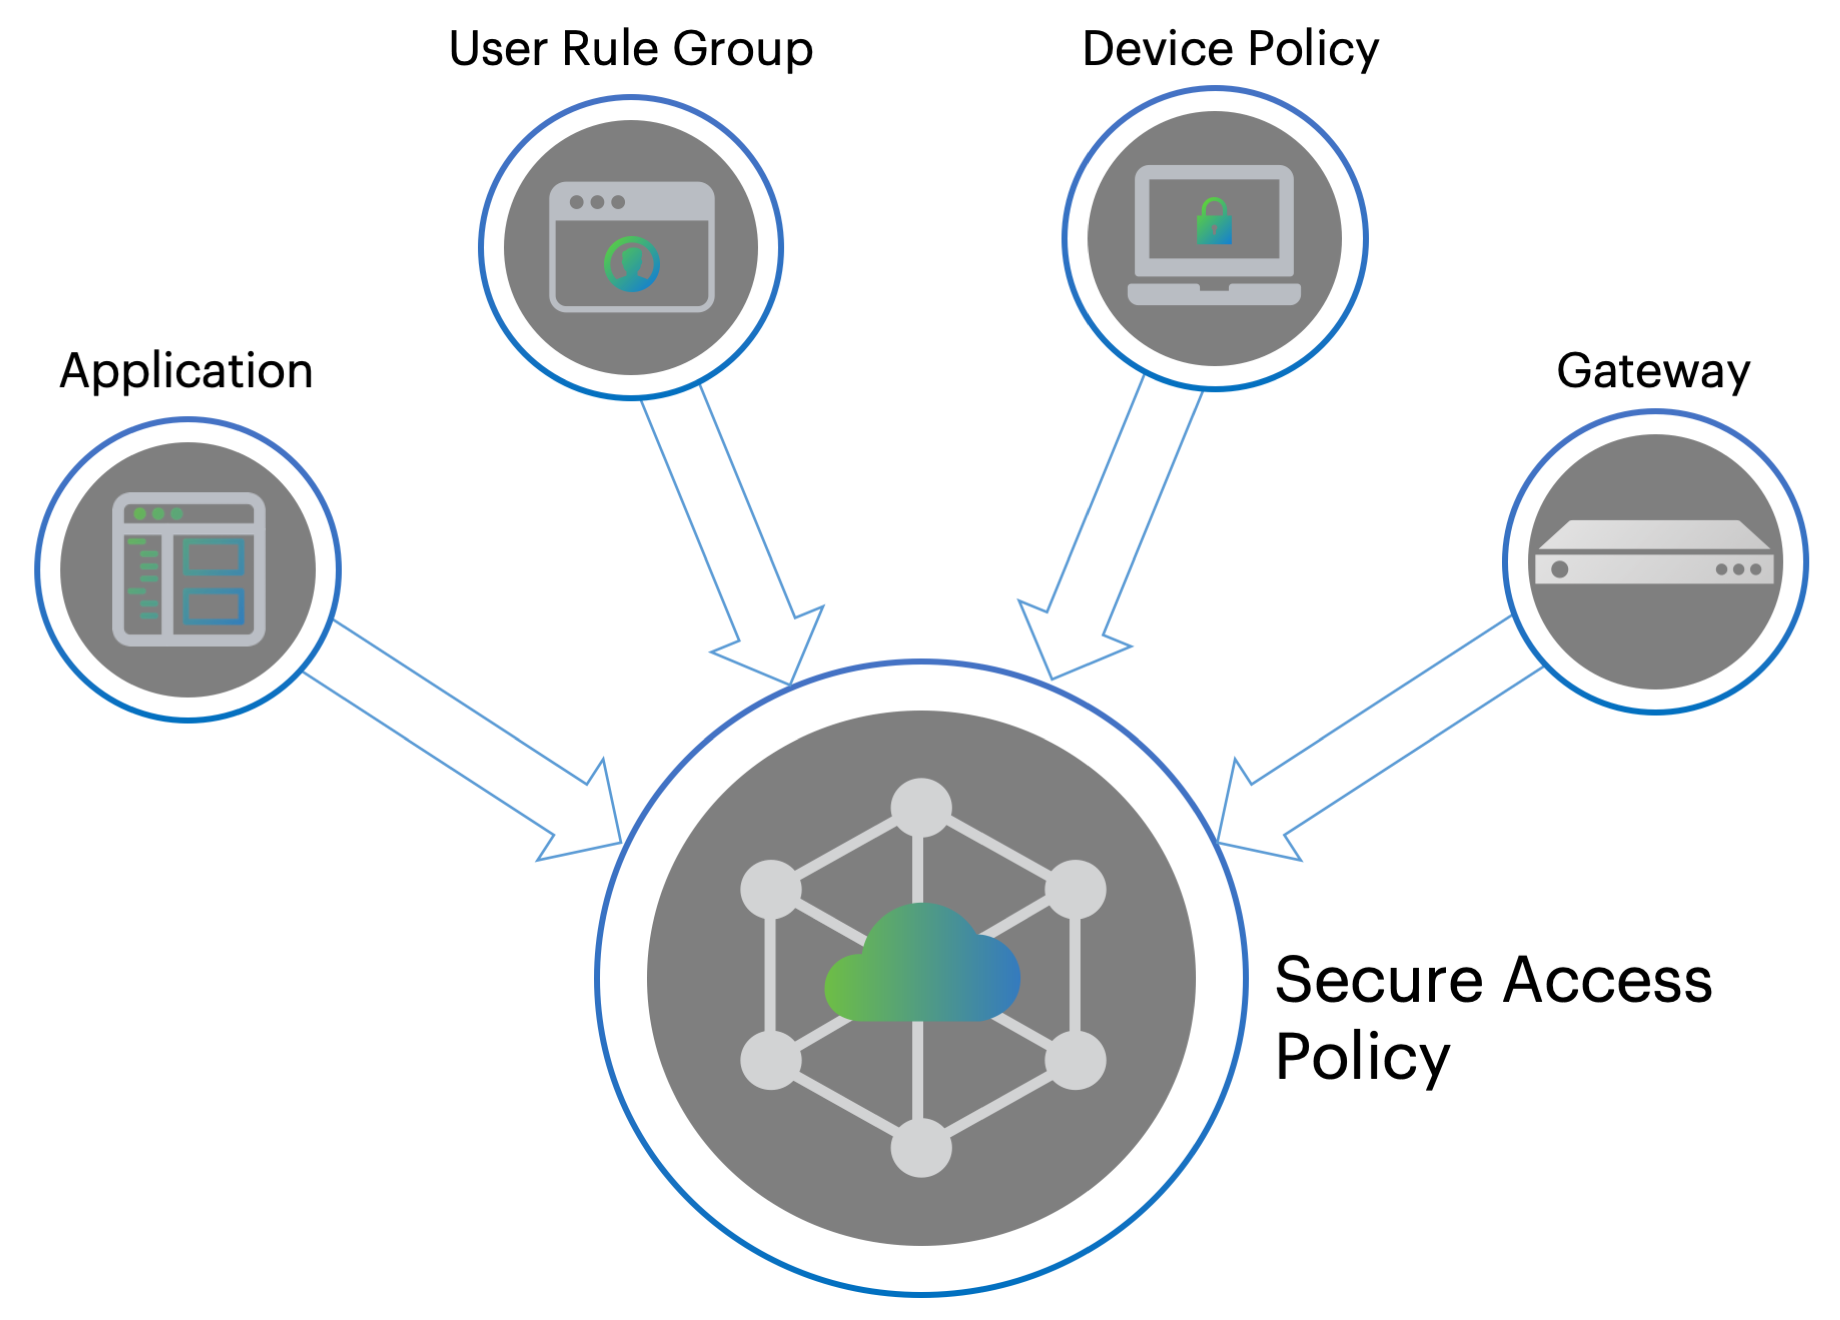 Creating a secure access policy